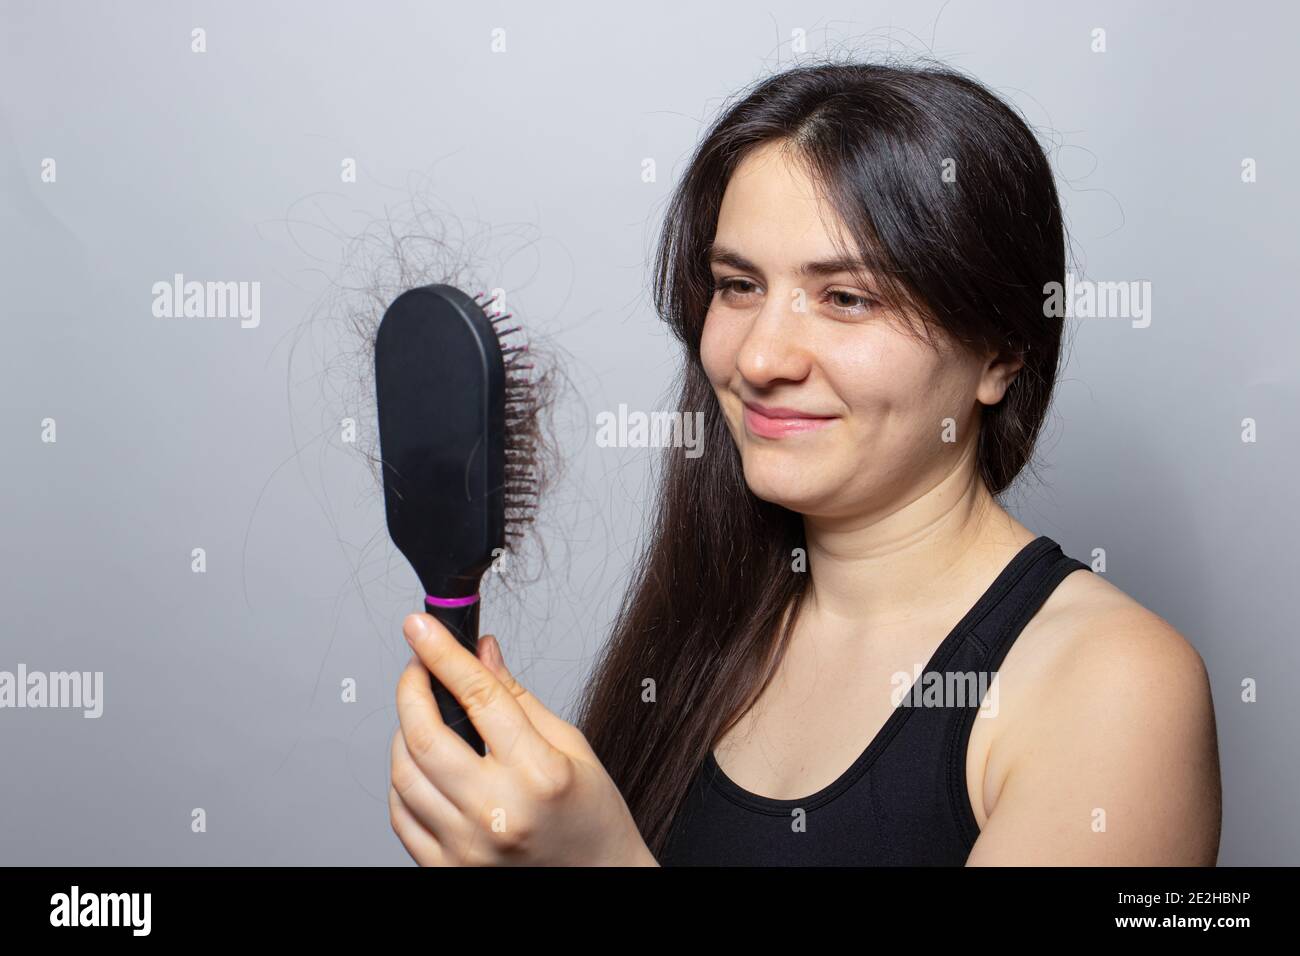 The girl is holding a hairbrush with her hair falling out and smiling. Hair loss, hair care and treatment. Doctor trichologist. Stock Photo